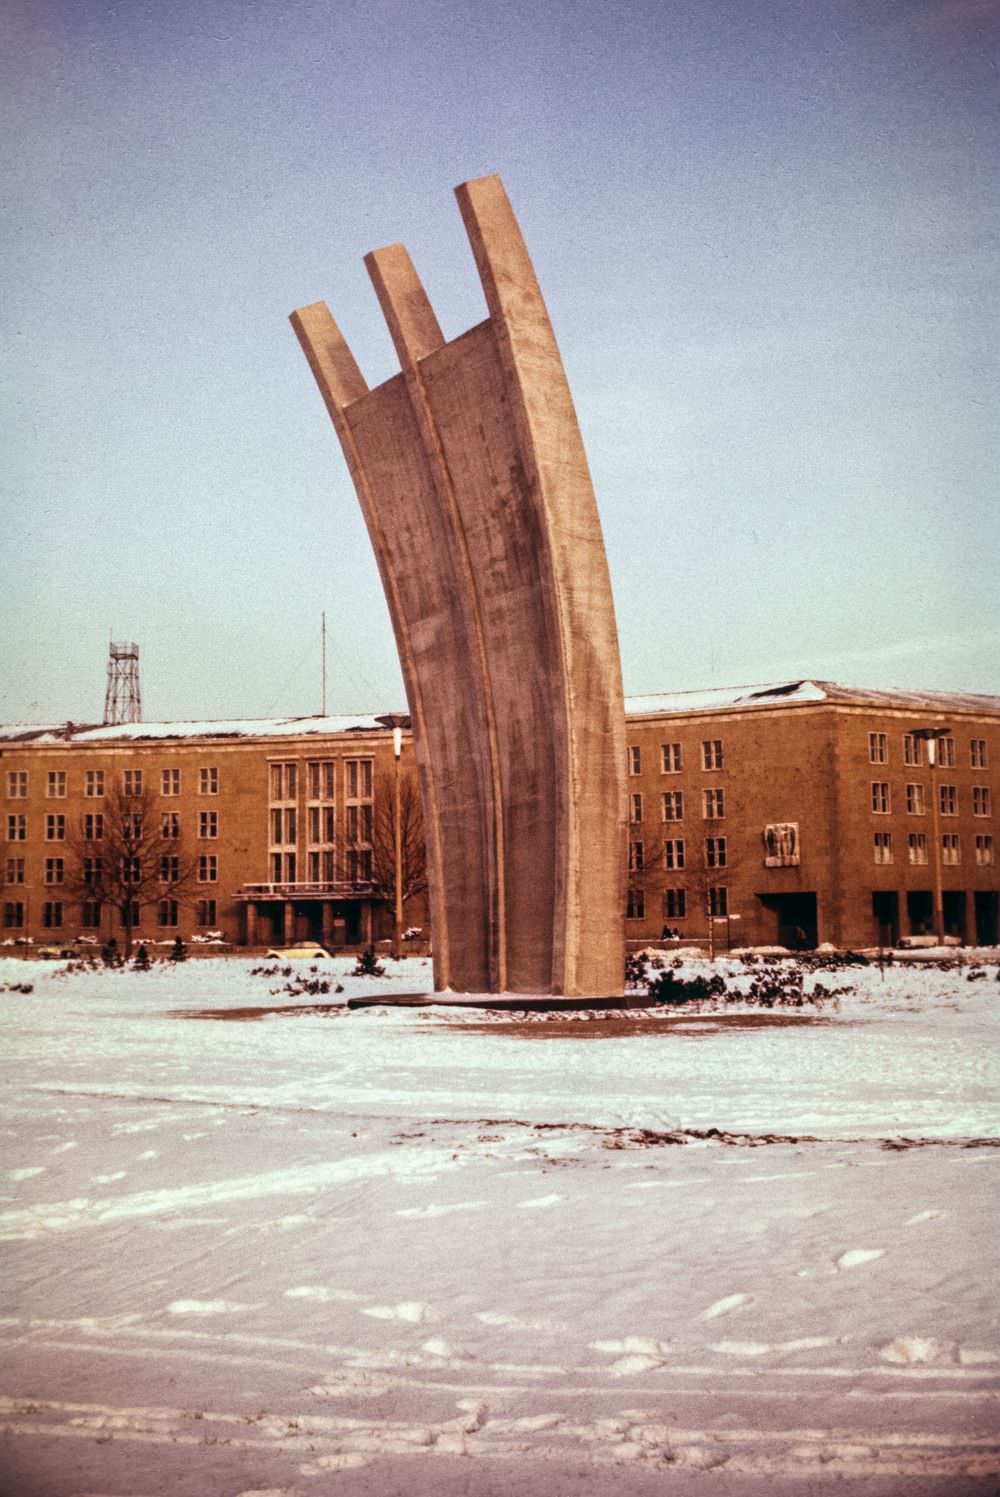 The 'hunger rake' memorial at Tempelhof Airport commemorates the Berlin Airlift of 1948/9 when allied aircraft kept West Berlin supplied by air to break a Soviet blockade.